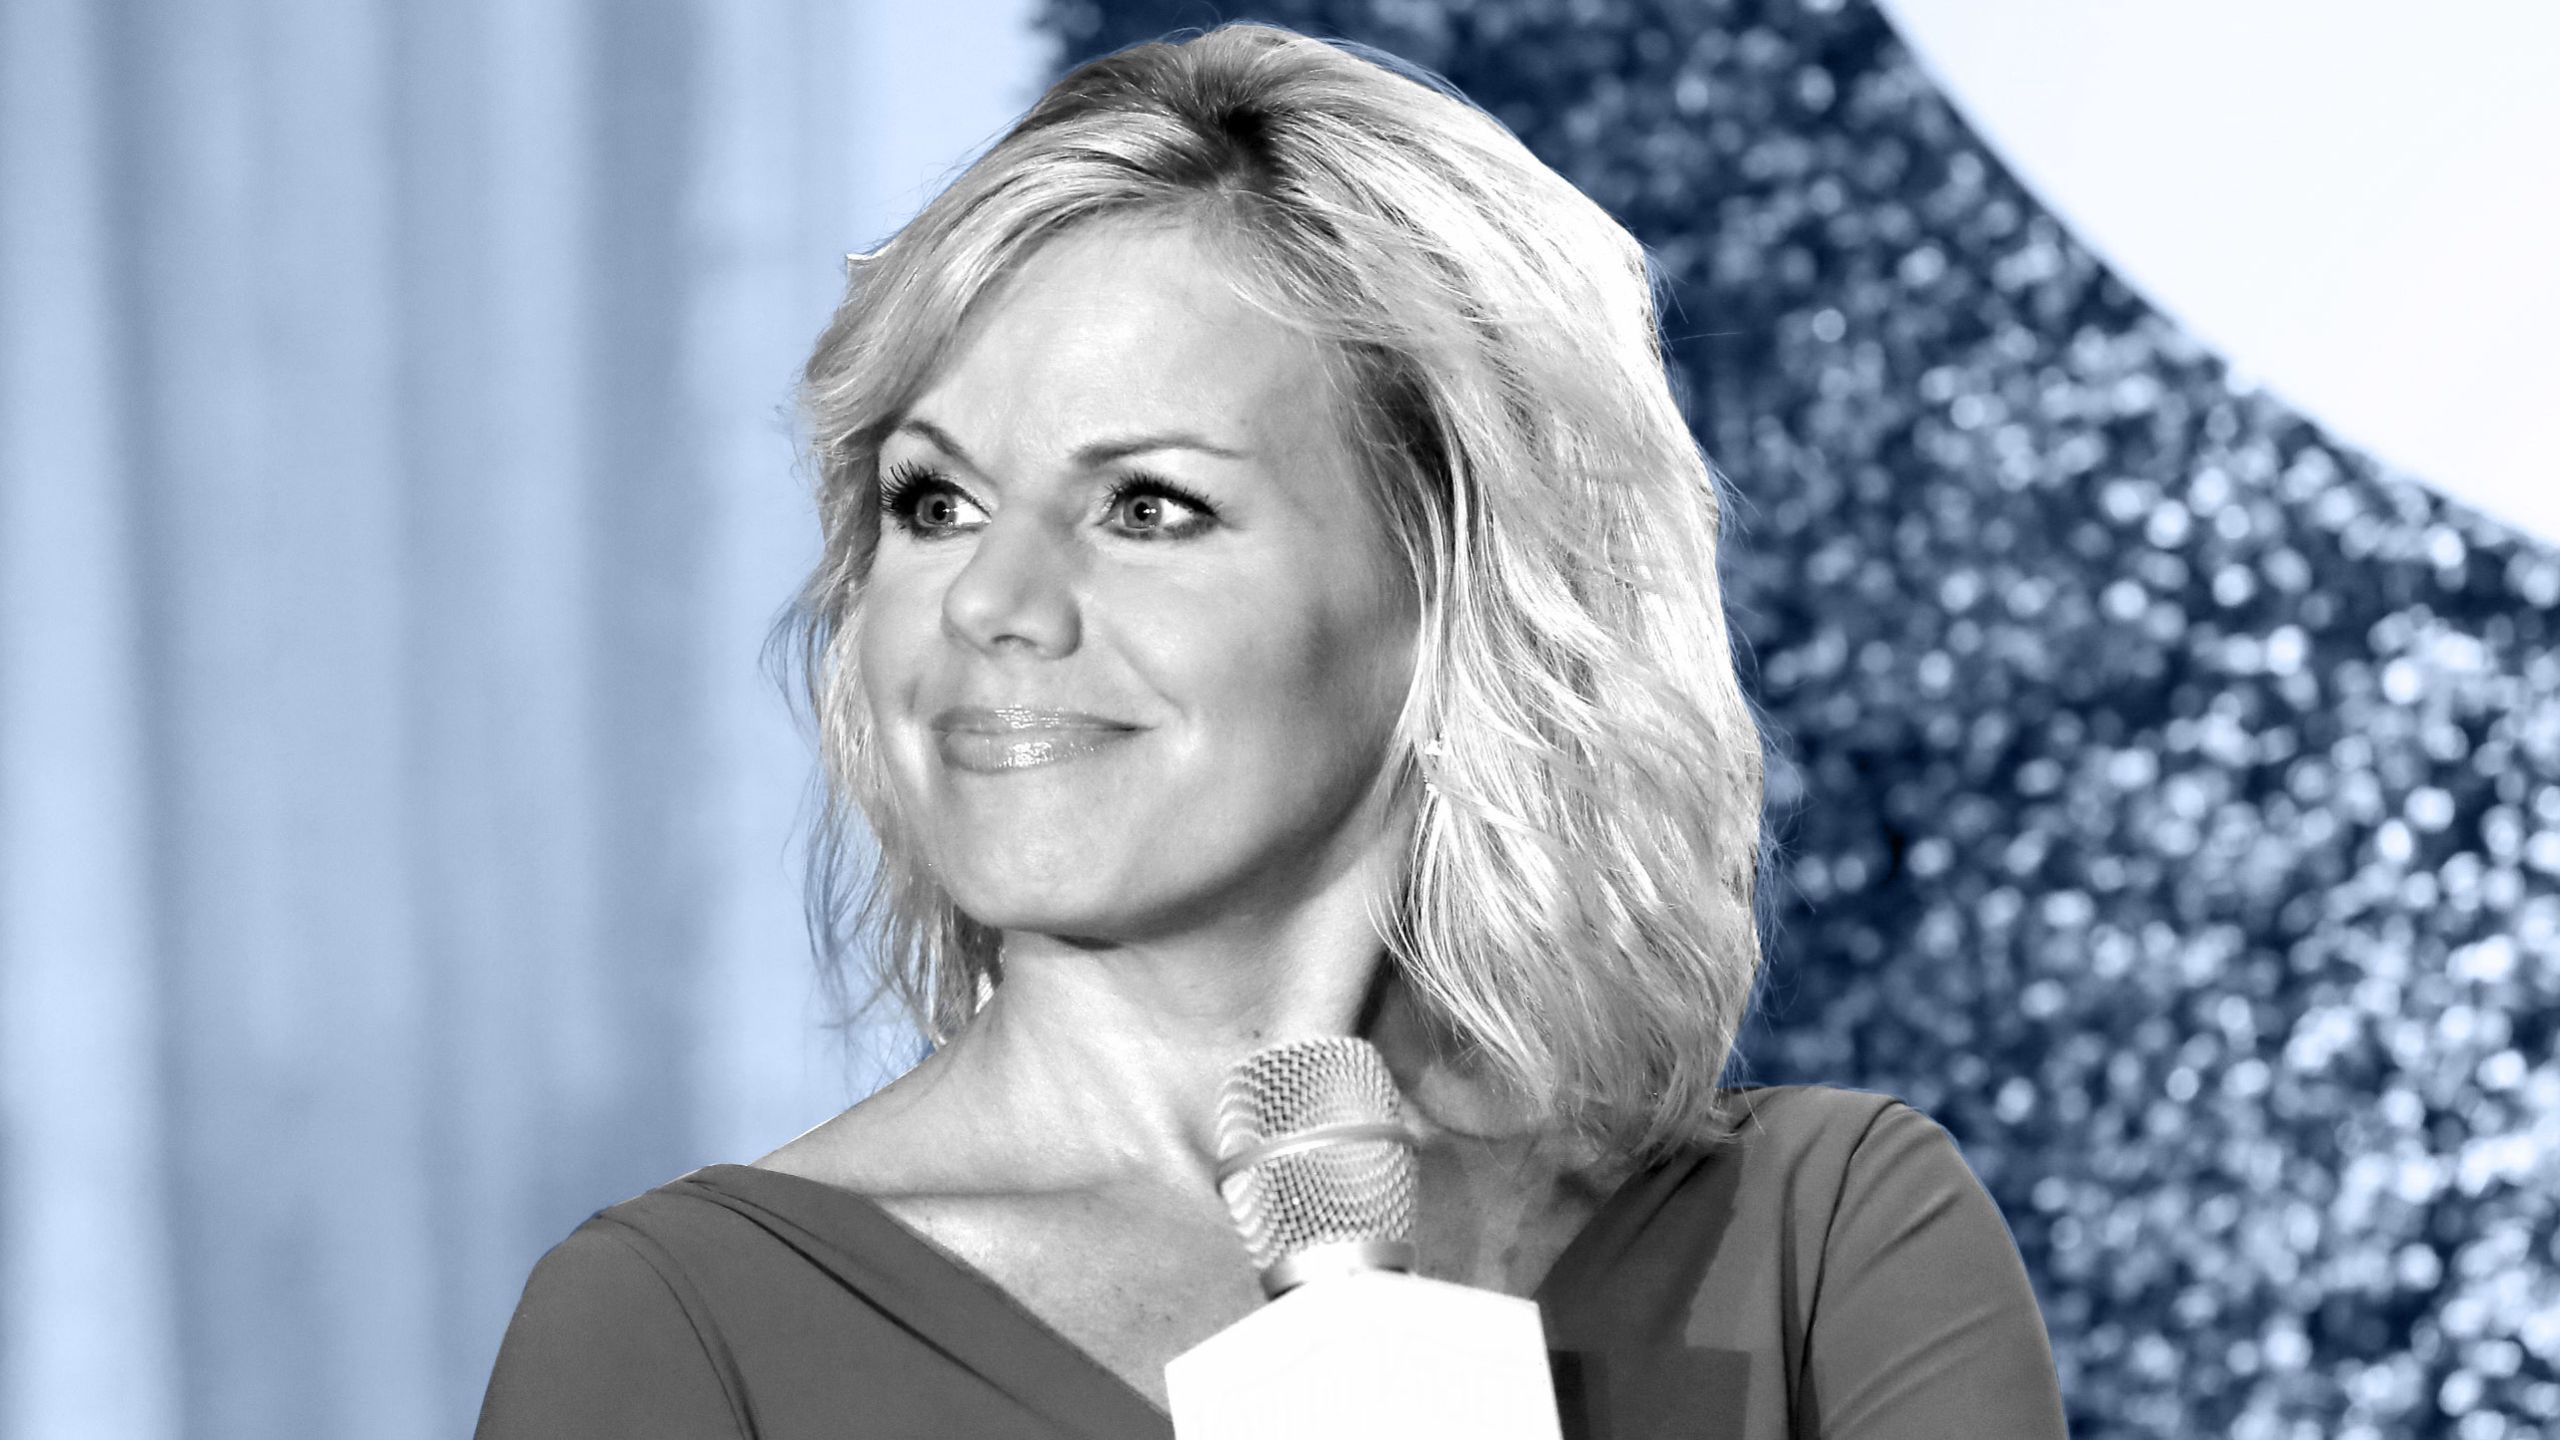 Gretchen Carlson Anal - Gretchen Carlson Fox Sexual Harassment Suit - Interview With Her Lawyer |  Marie Claire